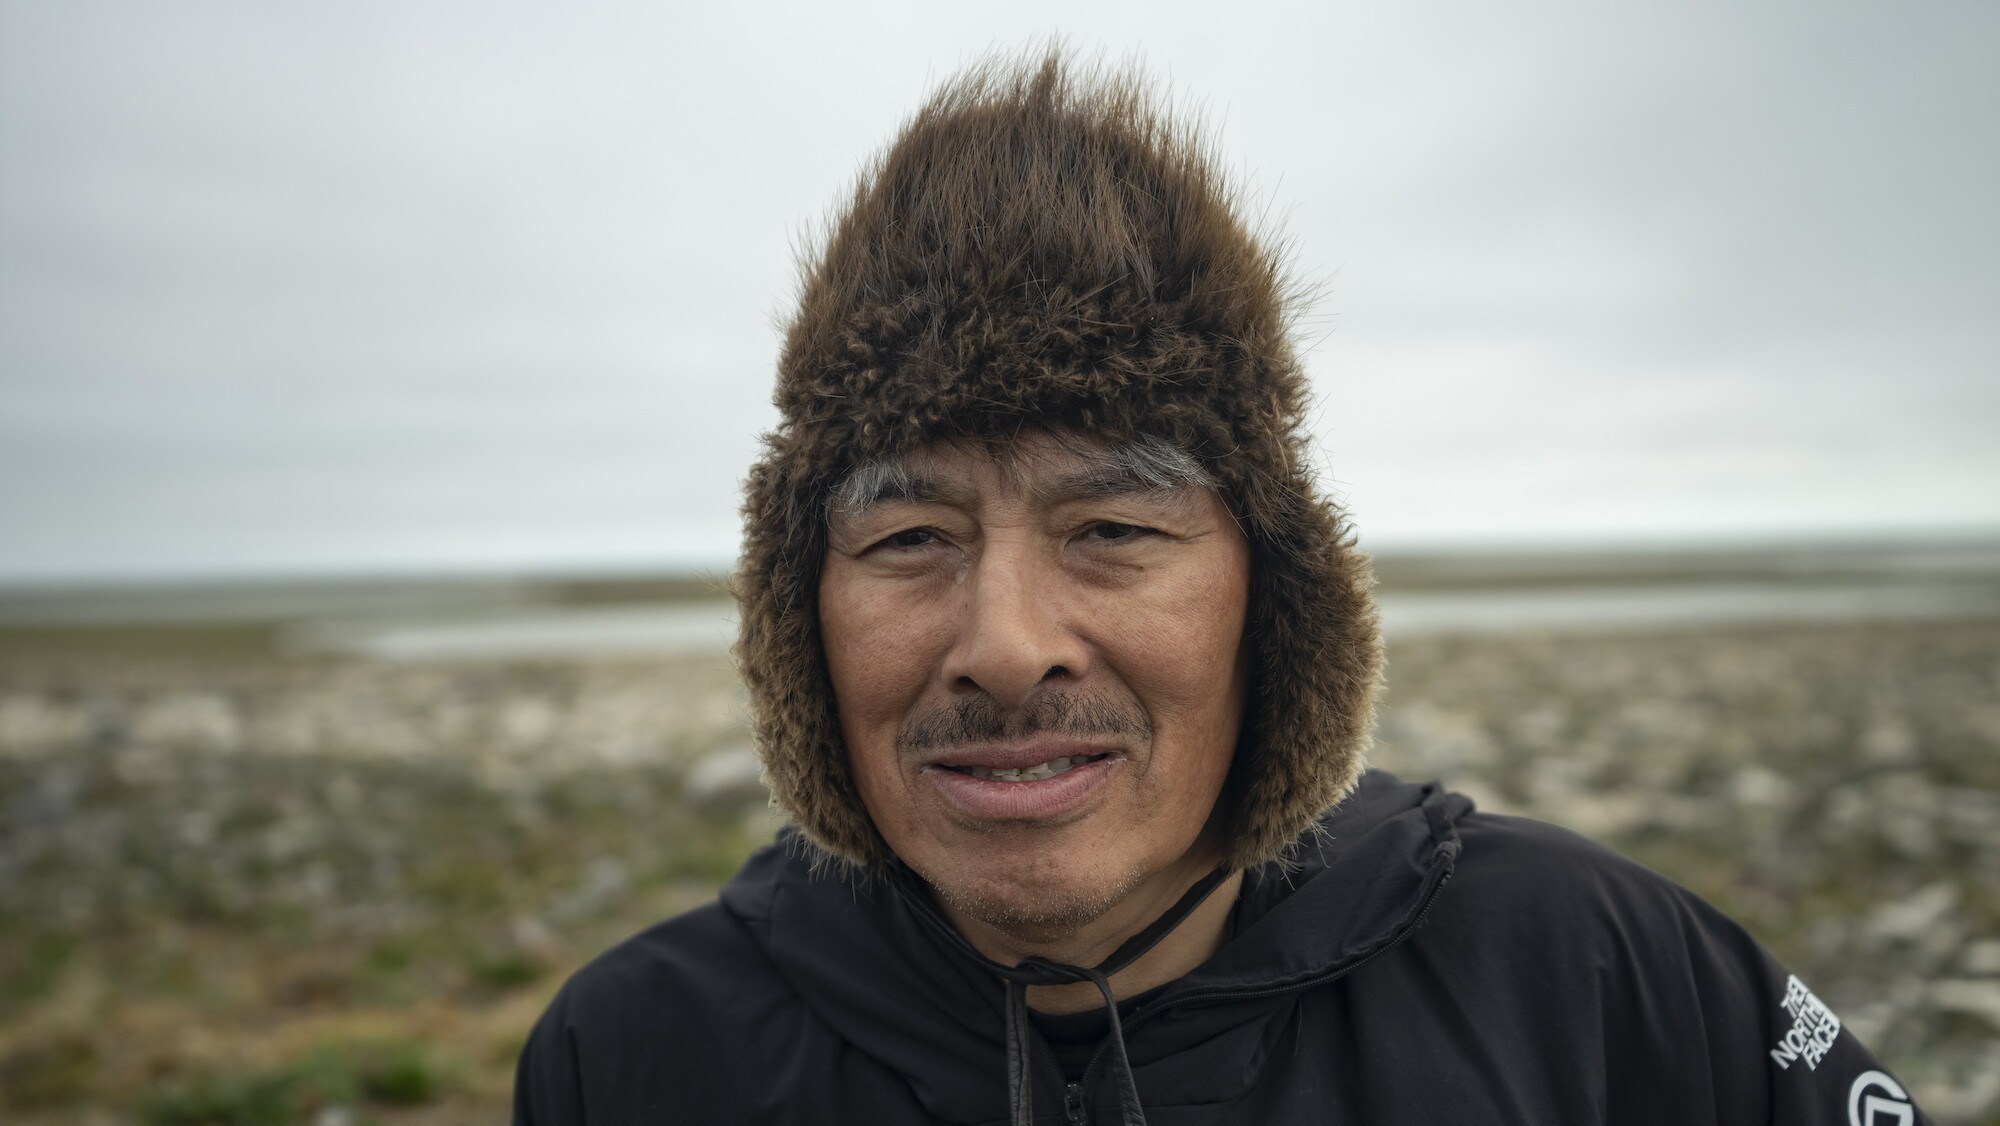 Team member Jacob Keanik poses for a portrait on King William Island, Nunavut, Canada. He is part of a team searching for Sir John Franklin's lost tomb on King William Island, Nunavut, Canada. (National Geographic/Renan Ozturk)